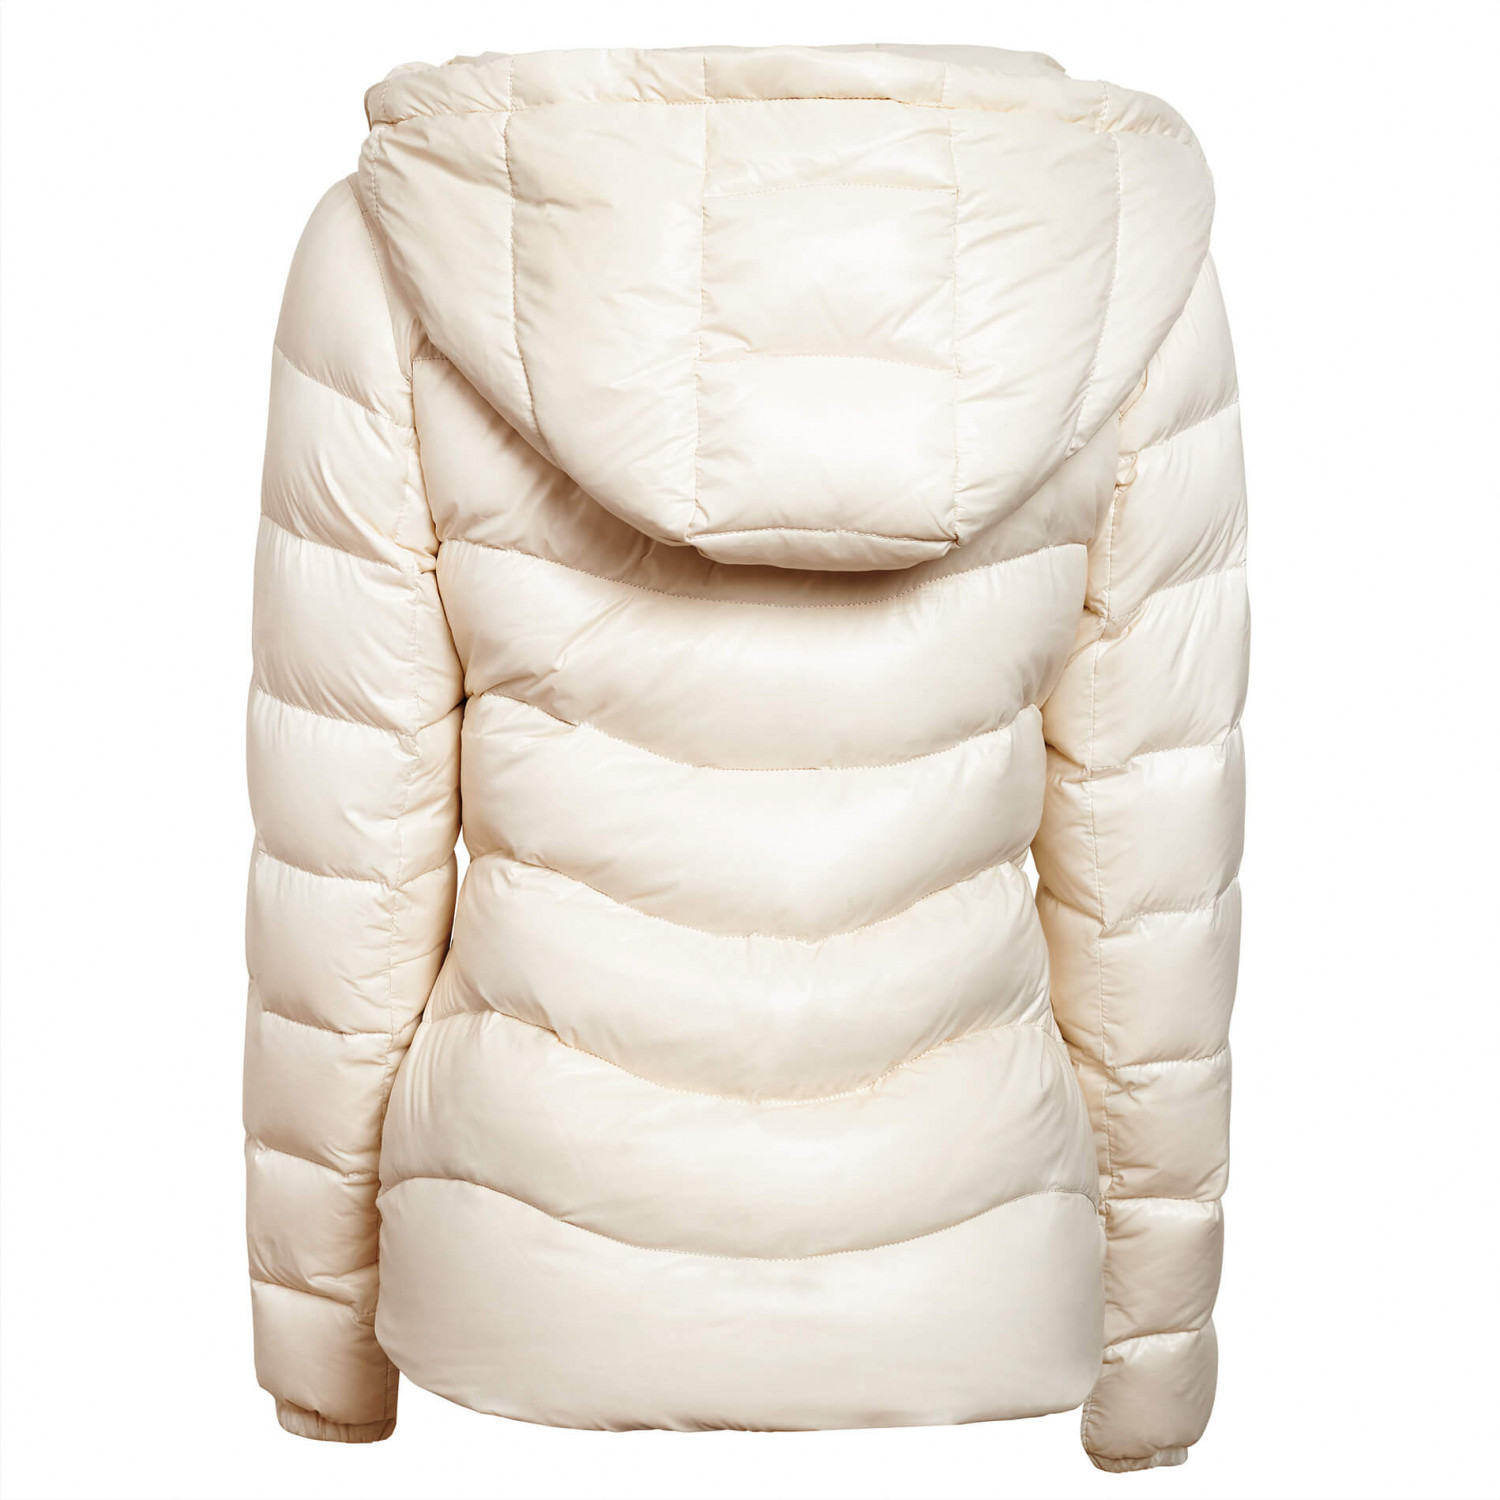 Puffer jacket with fur